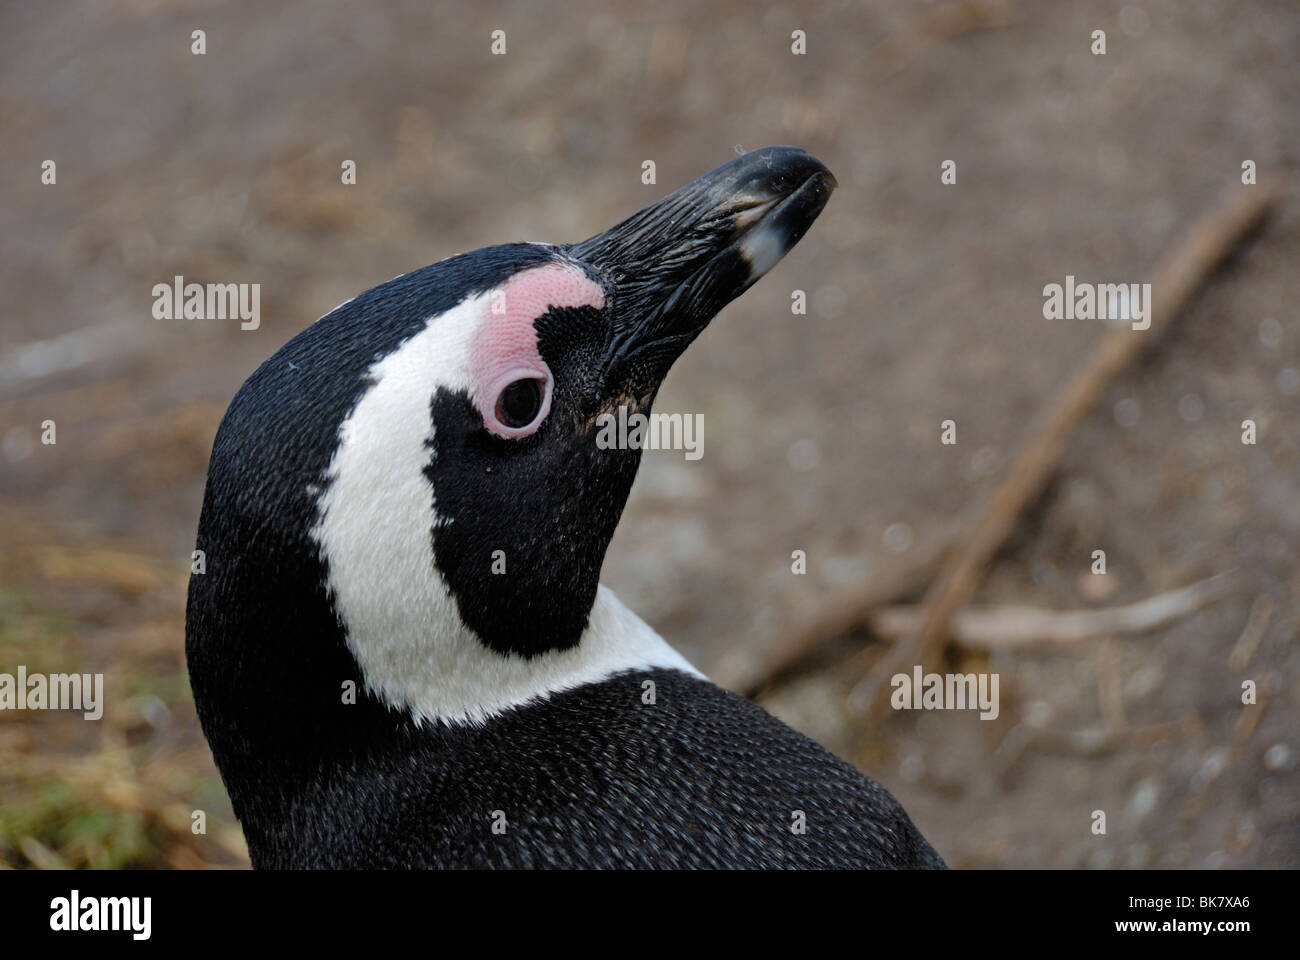 Portrait of Black Footed Jackass Penguins (Speniscus demersus), Betty's Bay, South Western Cape, South Africa Stock Photo